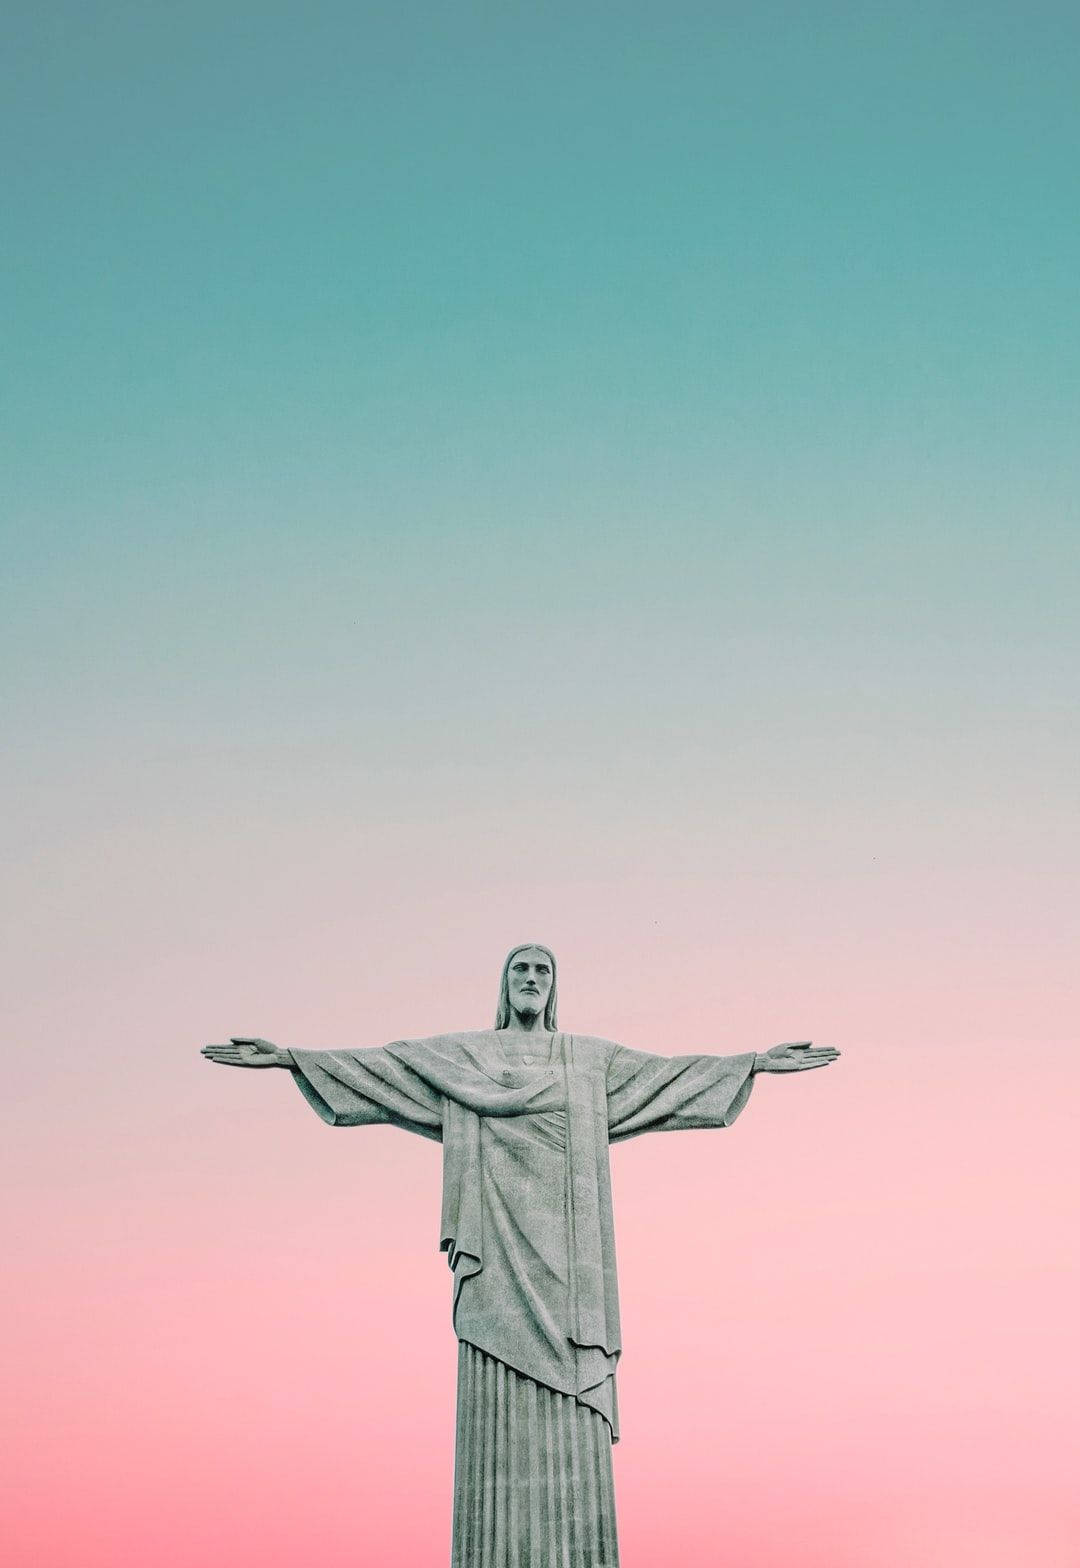 Aesthetic Christian Photograph Against Pink Horizon Background